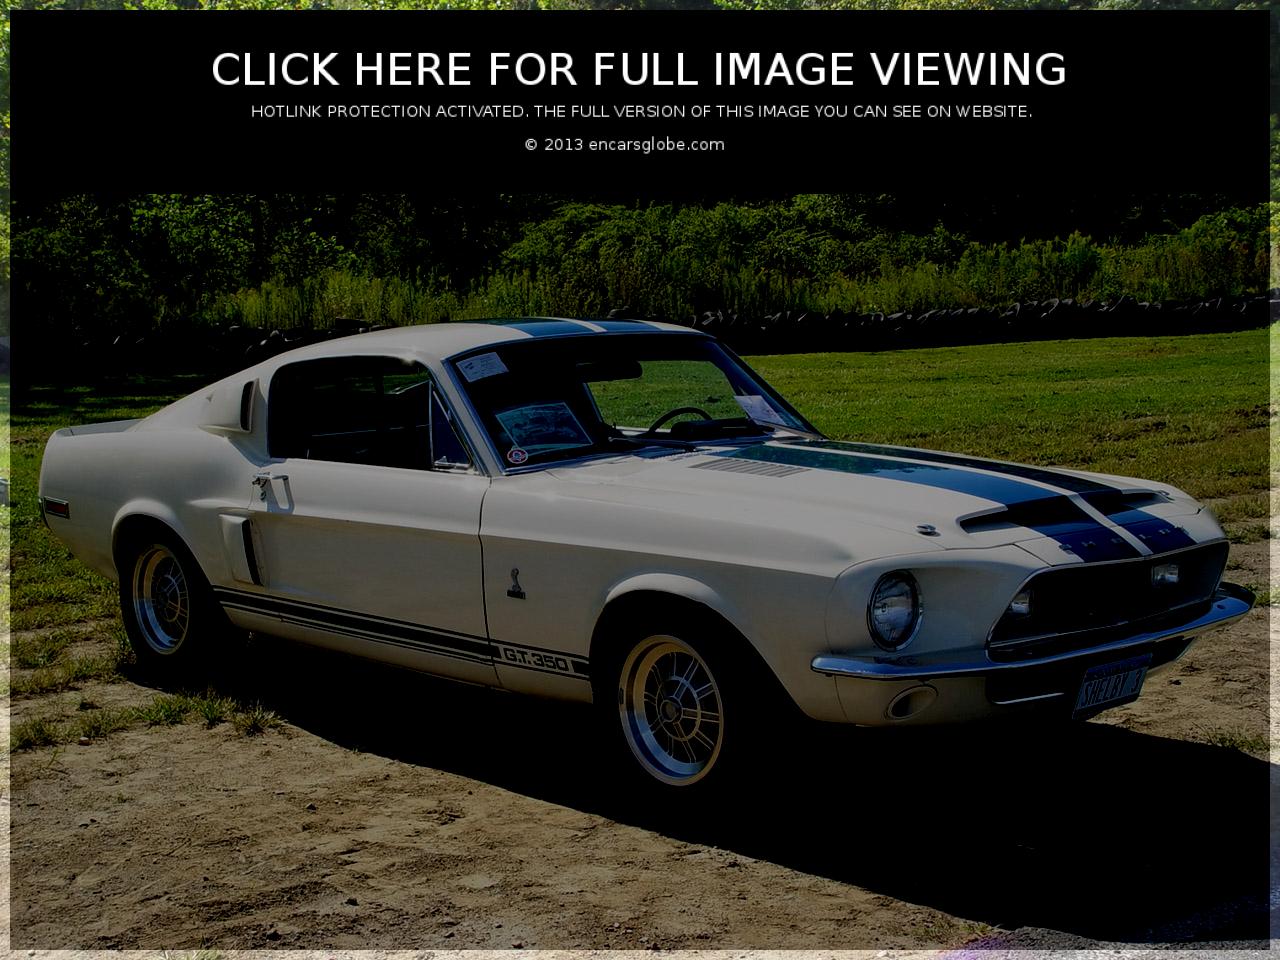 Shelby GT 350 Photo Gallery: Photo #05 out of 11, Image Size - 933 ...